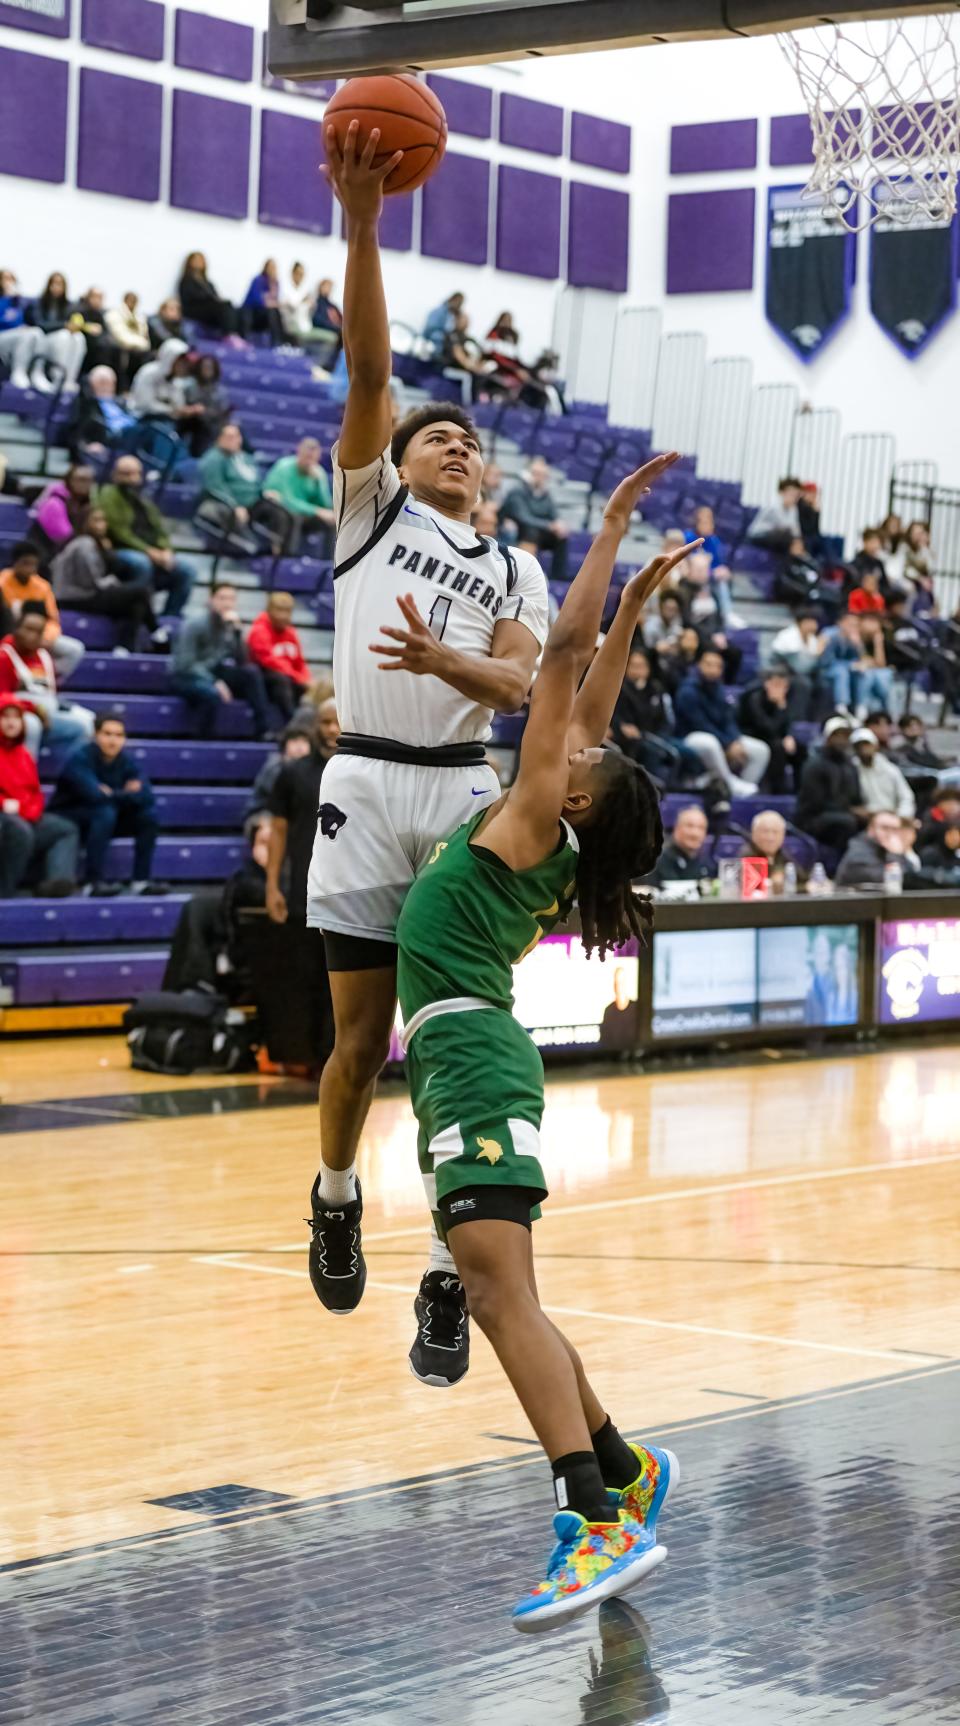 Arness Lawson led Pickerington North to wins over Grove City on Friday and Eastmoor Academy on Saturday.